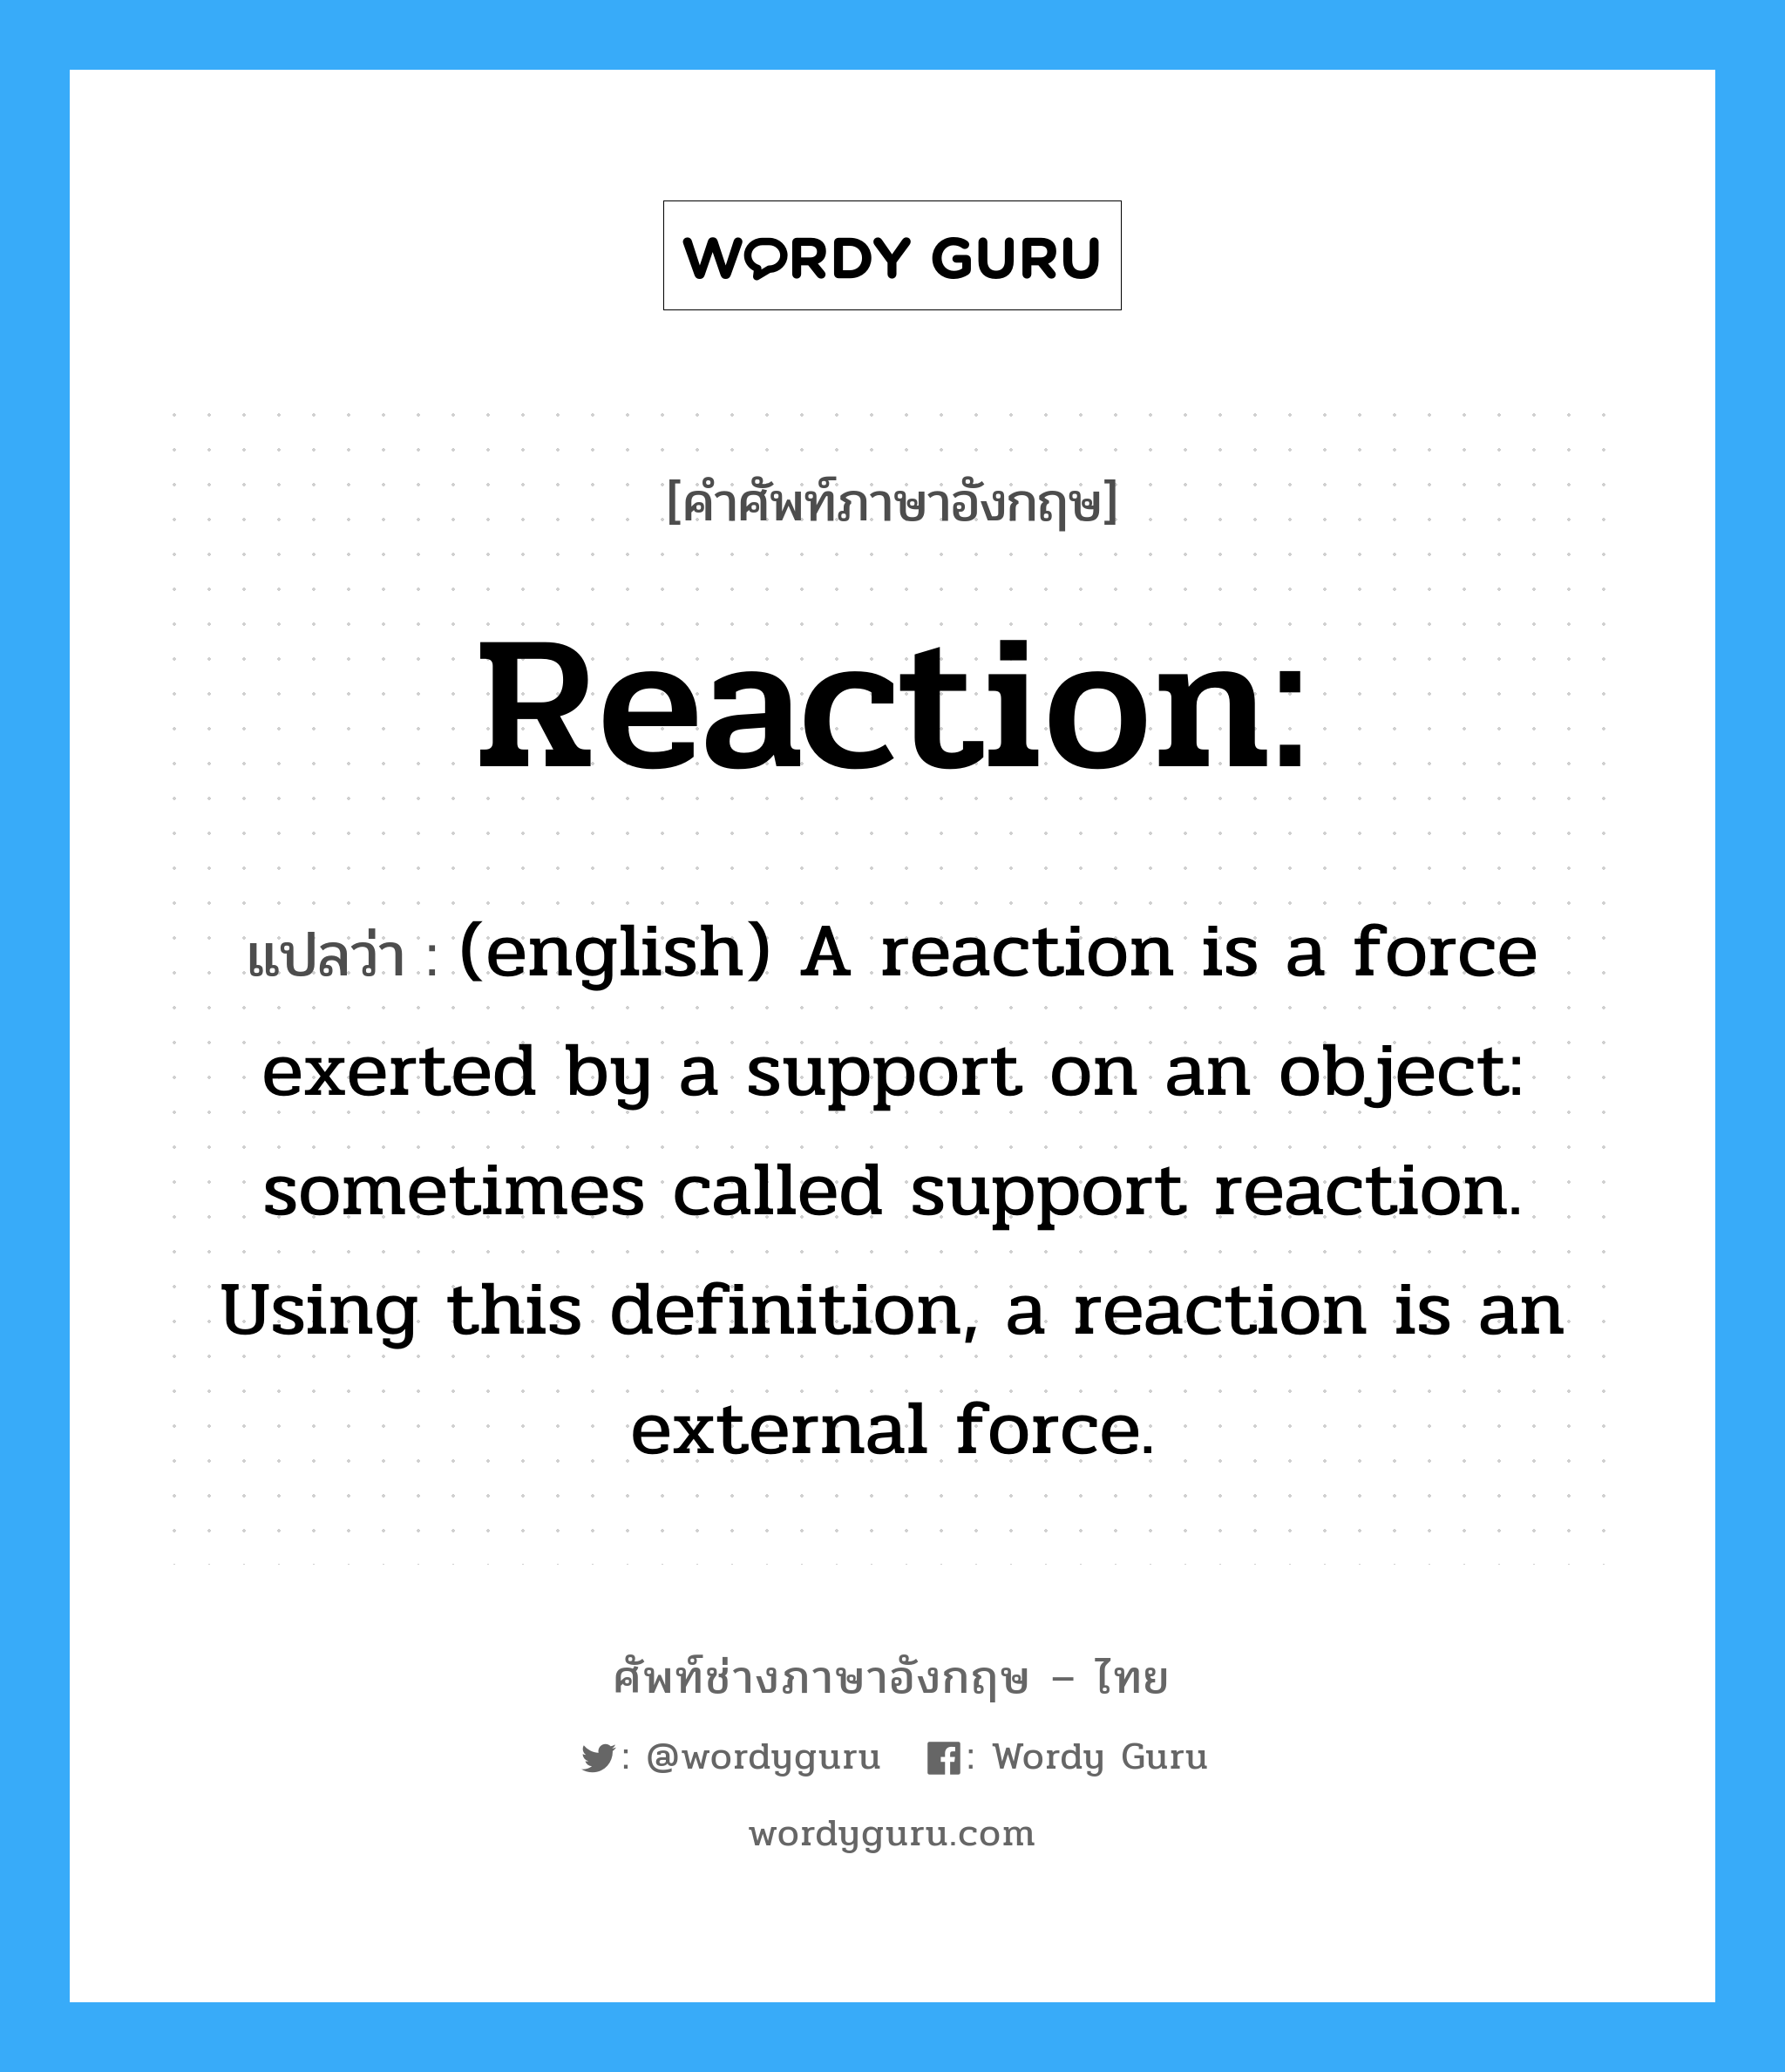 Reaction: แปลว่า?, คำศัพท์ช่างภาษาอังกฤษ - ไทย Reaction: คำศัพท์ภาษาอังกฤษ Reaction: แปลว่า (english) A reaction is a force exerted by a support on an object: sometimes called support reaction. Using this definition, a reaction is an external force.